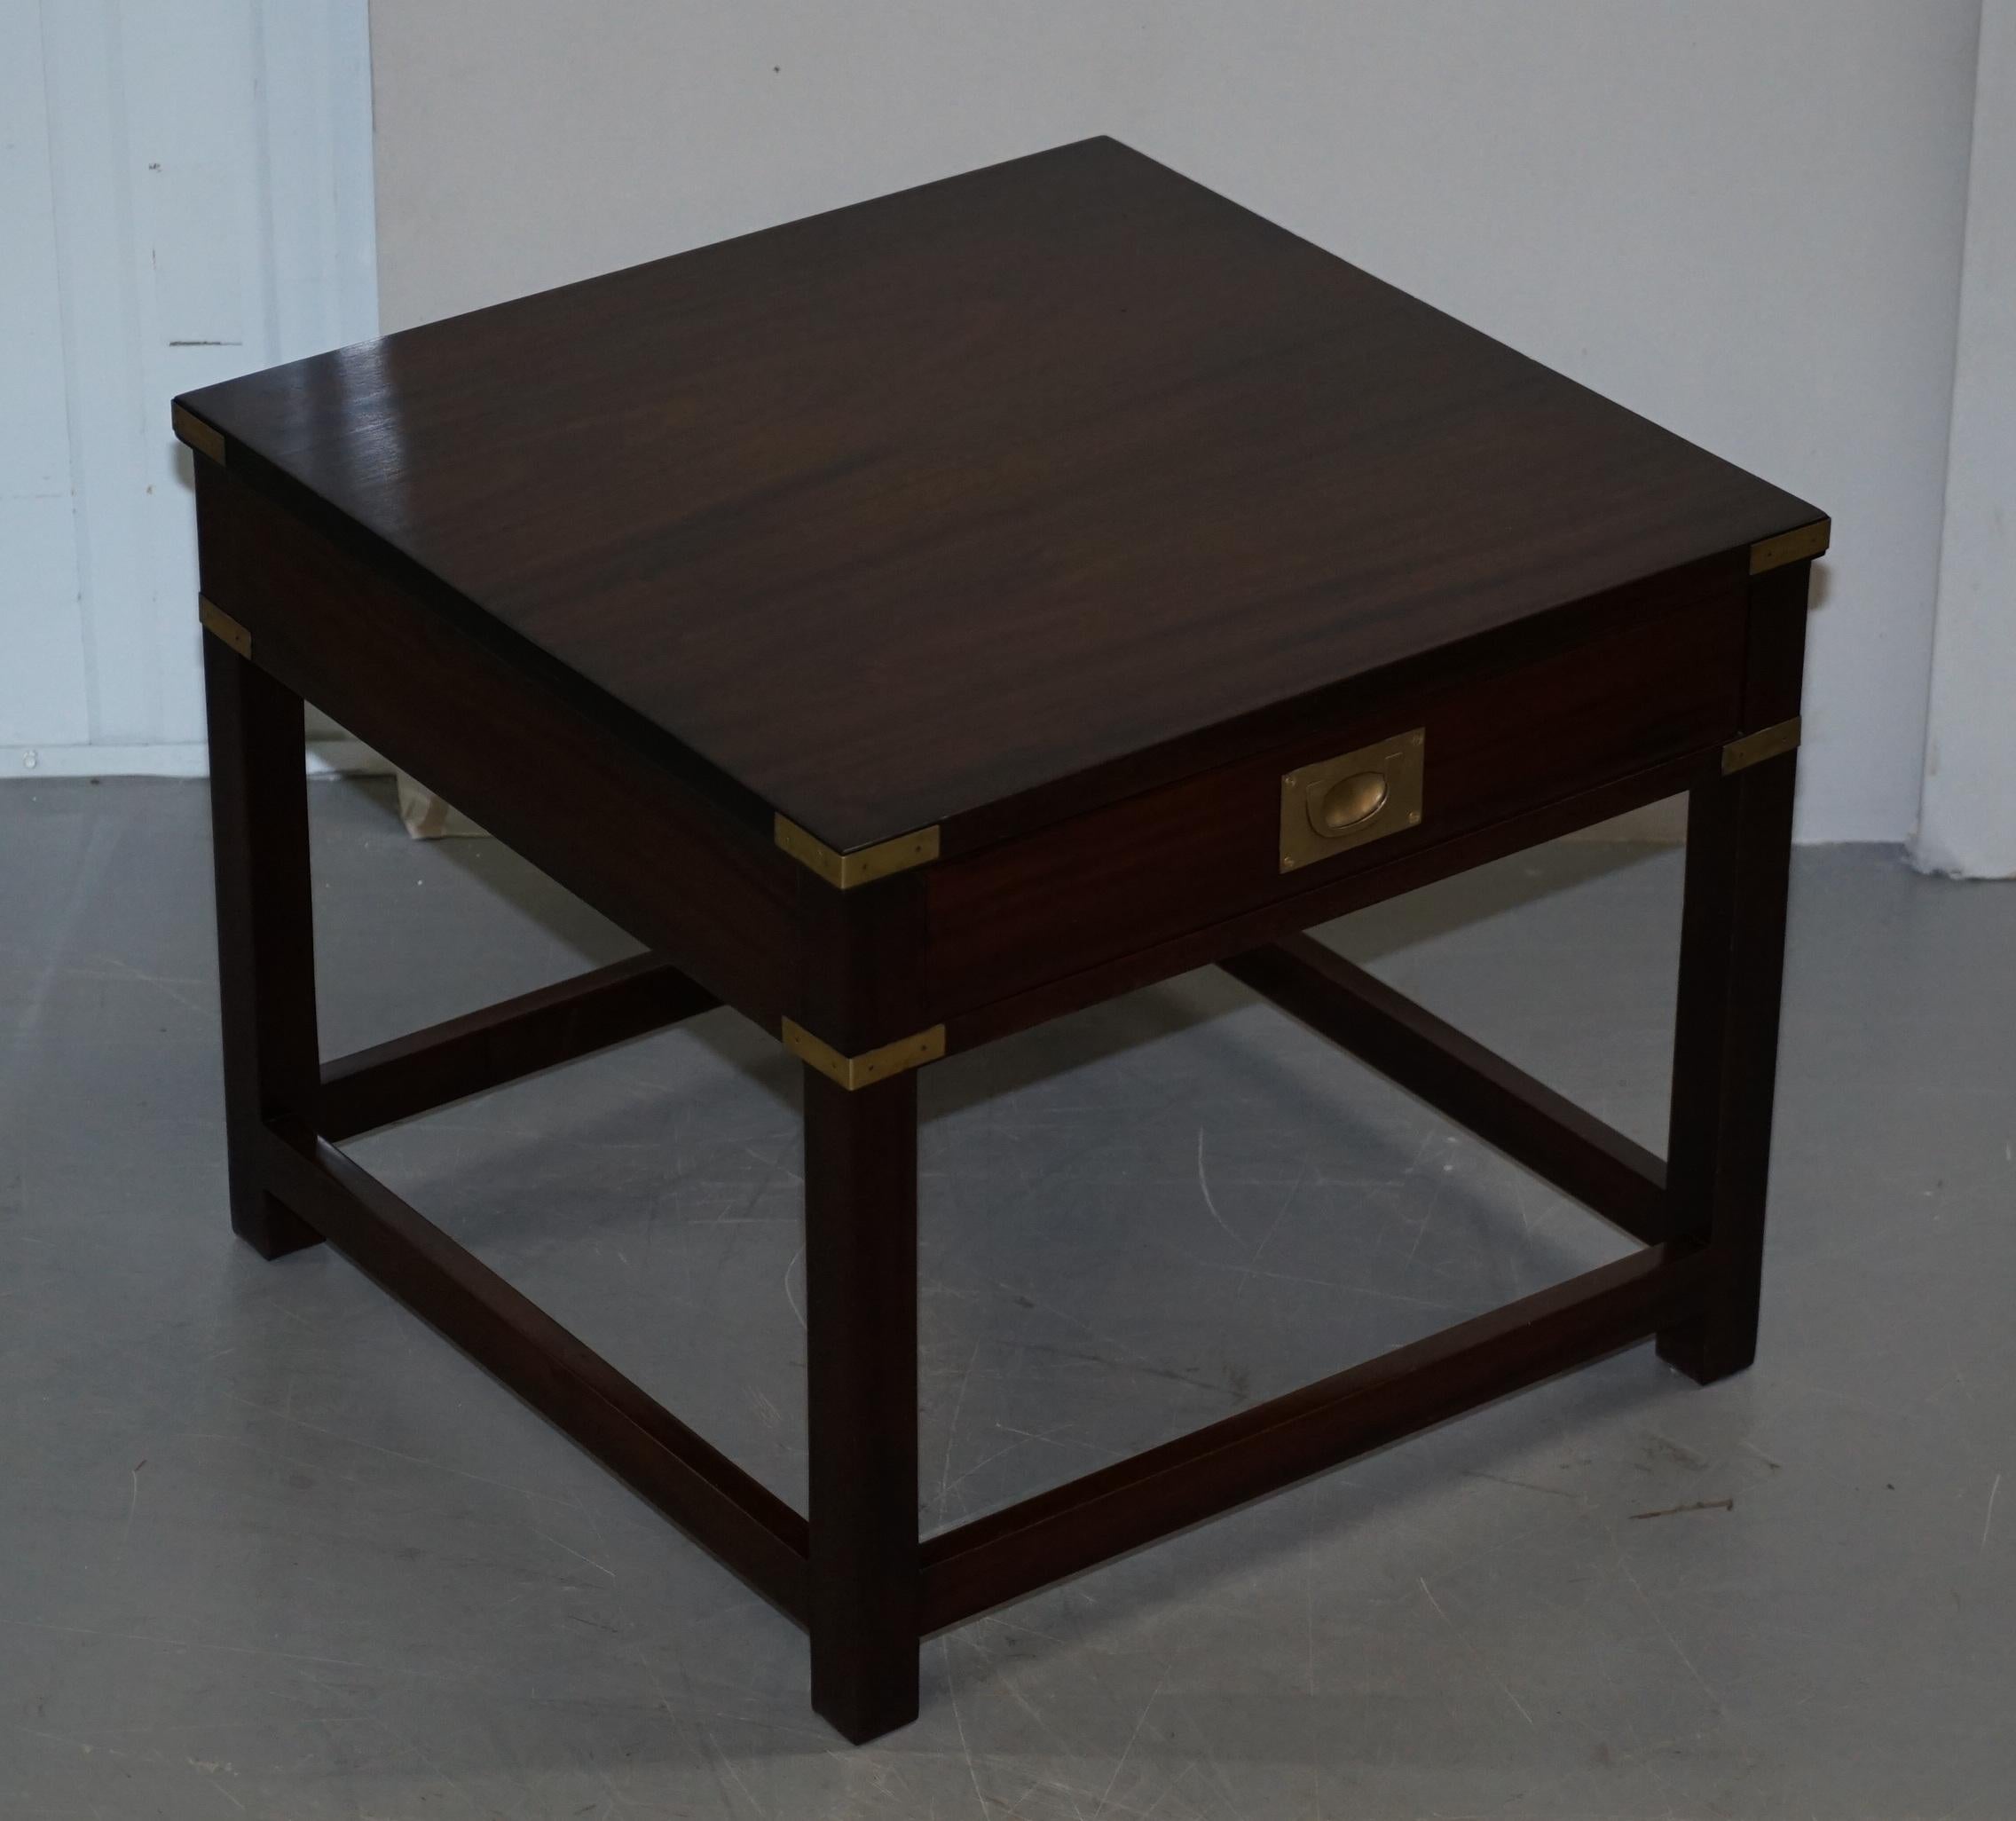 We are delighted to offer for sale this stunning pair of large single drawer R.E.H Kennedy furniture, retailed through Harrods London Military Campaign side tables

A good looking and well made pair, these are absolutely iconic and highly